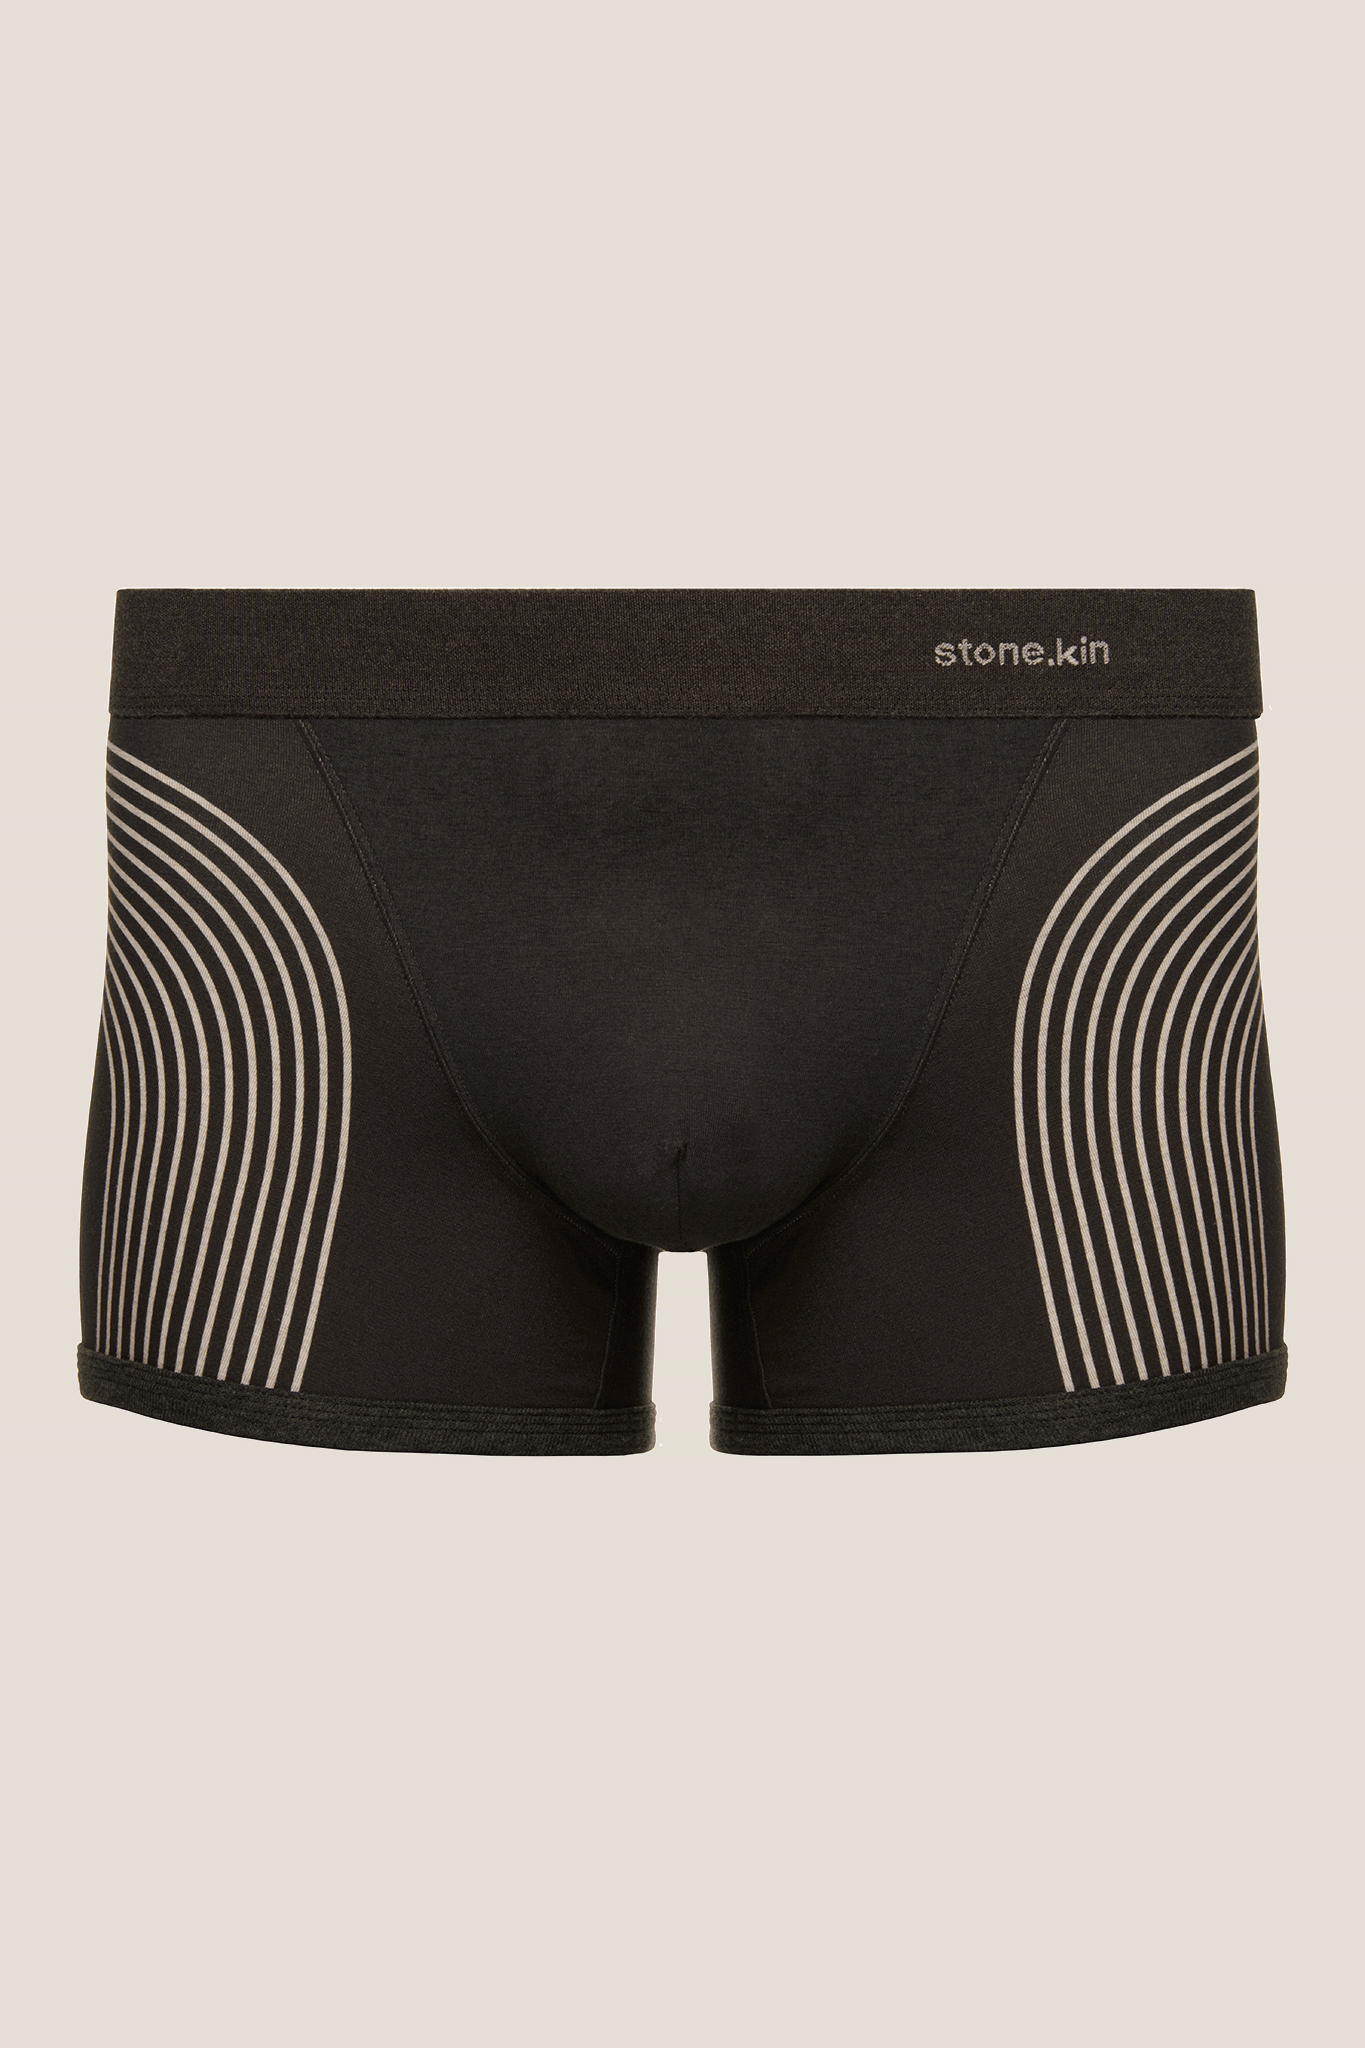 Stone.kin Mens Boxer Brief in Black with Lines Organic Cotton 